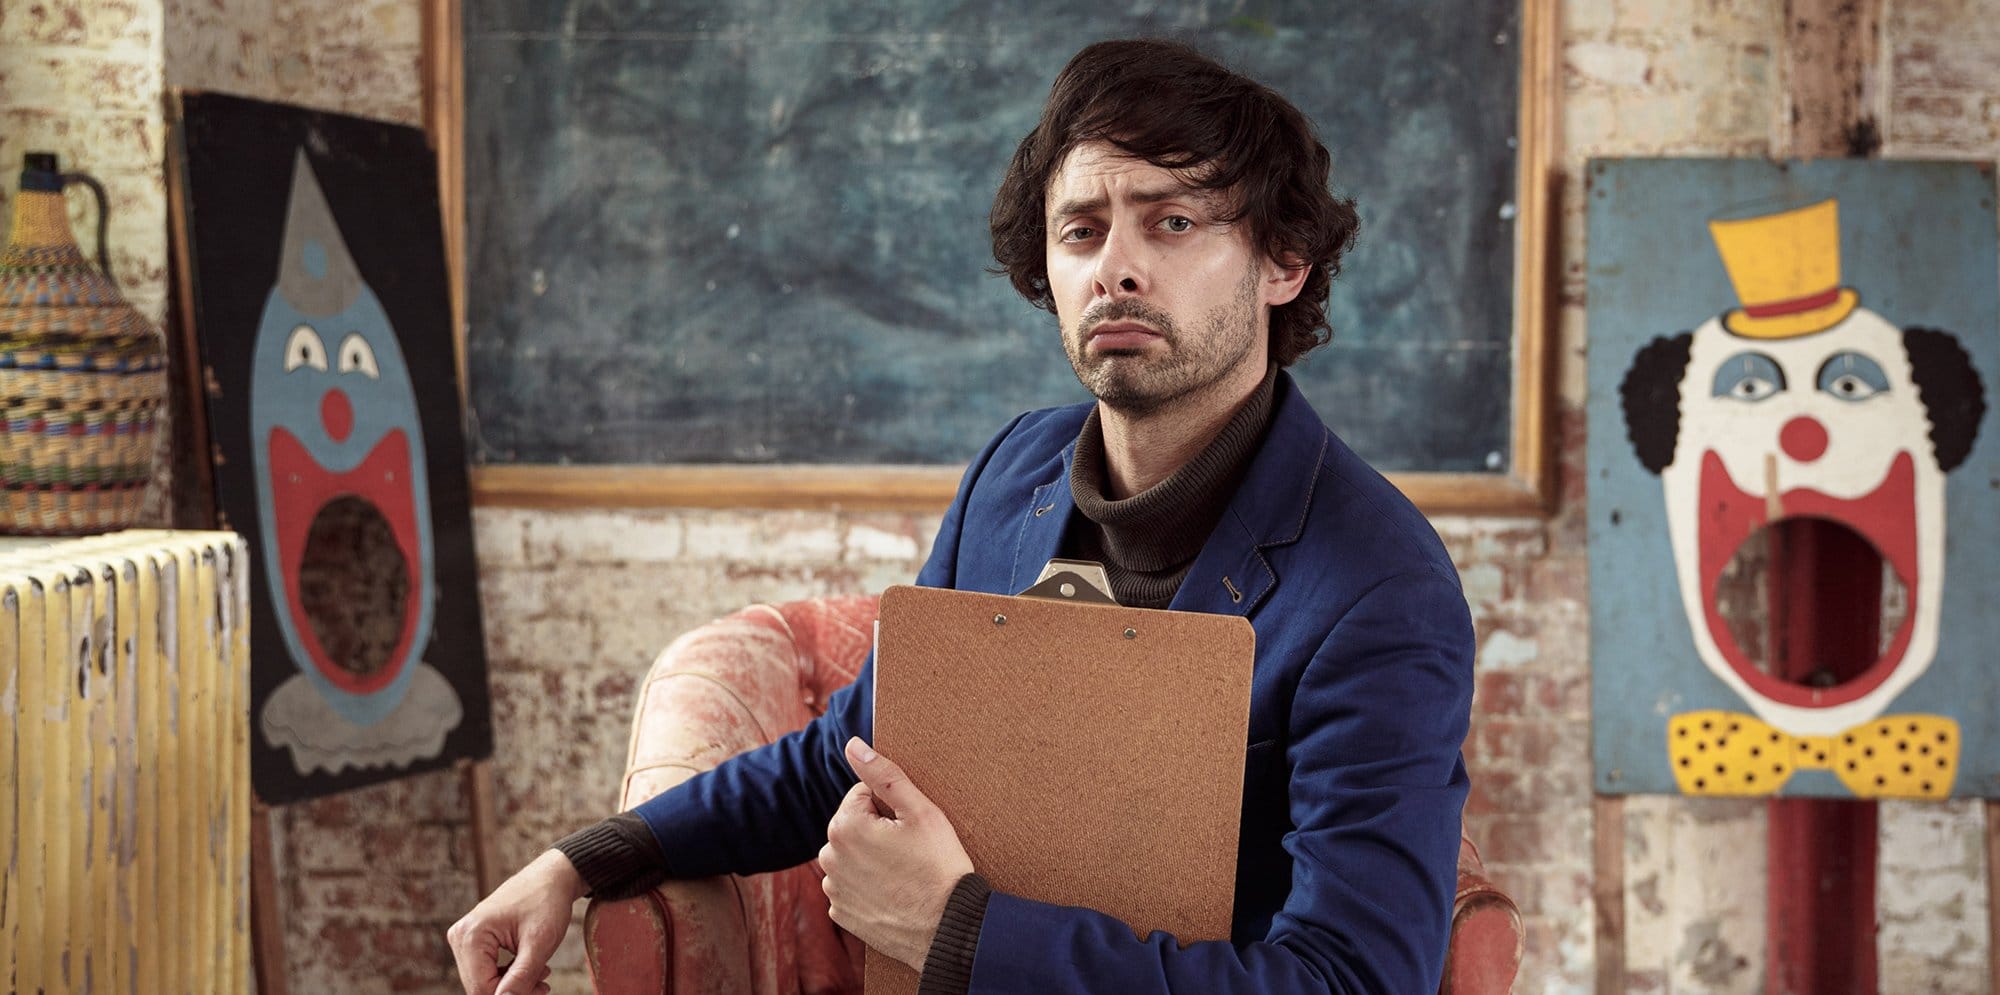 Man sits in a classroom pulling a funny face holding a clipboard